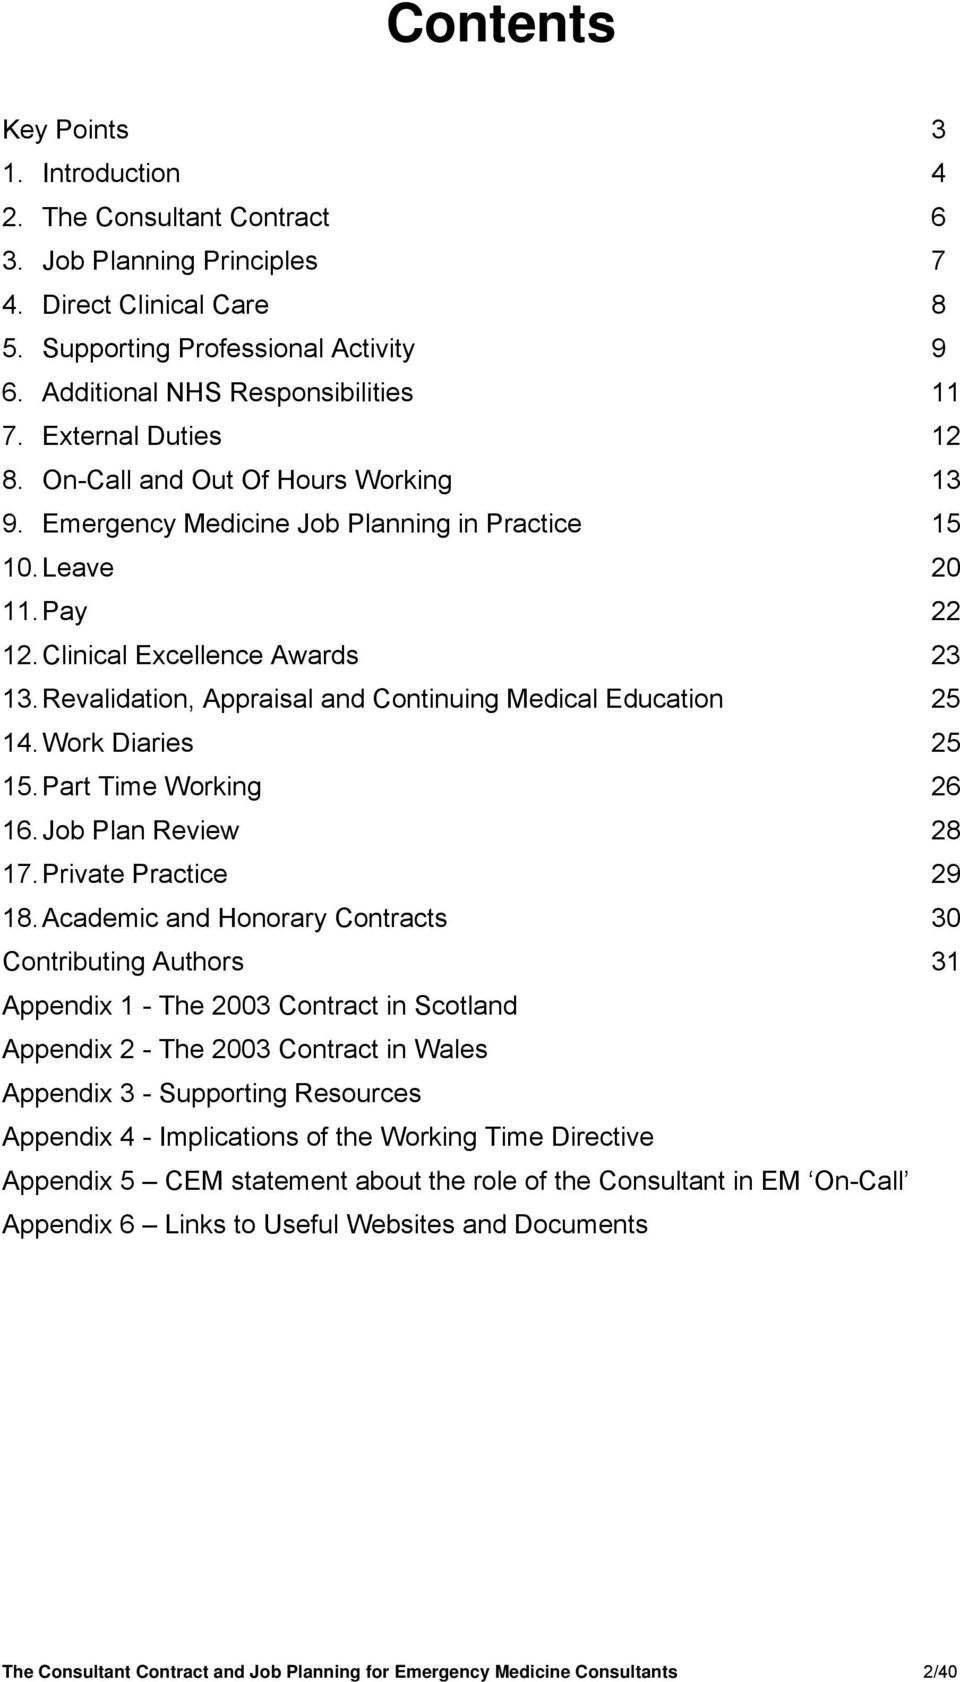 Clinical Excellence Awards 23 13. Revalidation, Appraisal and Continuing Medical Education 25 14. Work Diaries 25 15. Part Time Working 26 16. Job Plan Review 28 17. Private Practice 29 18.